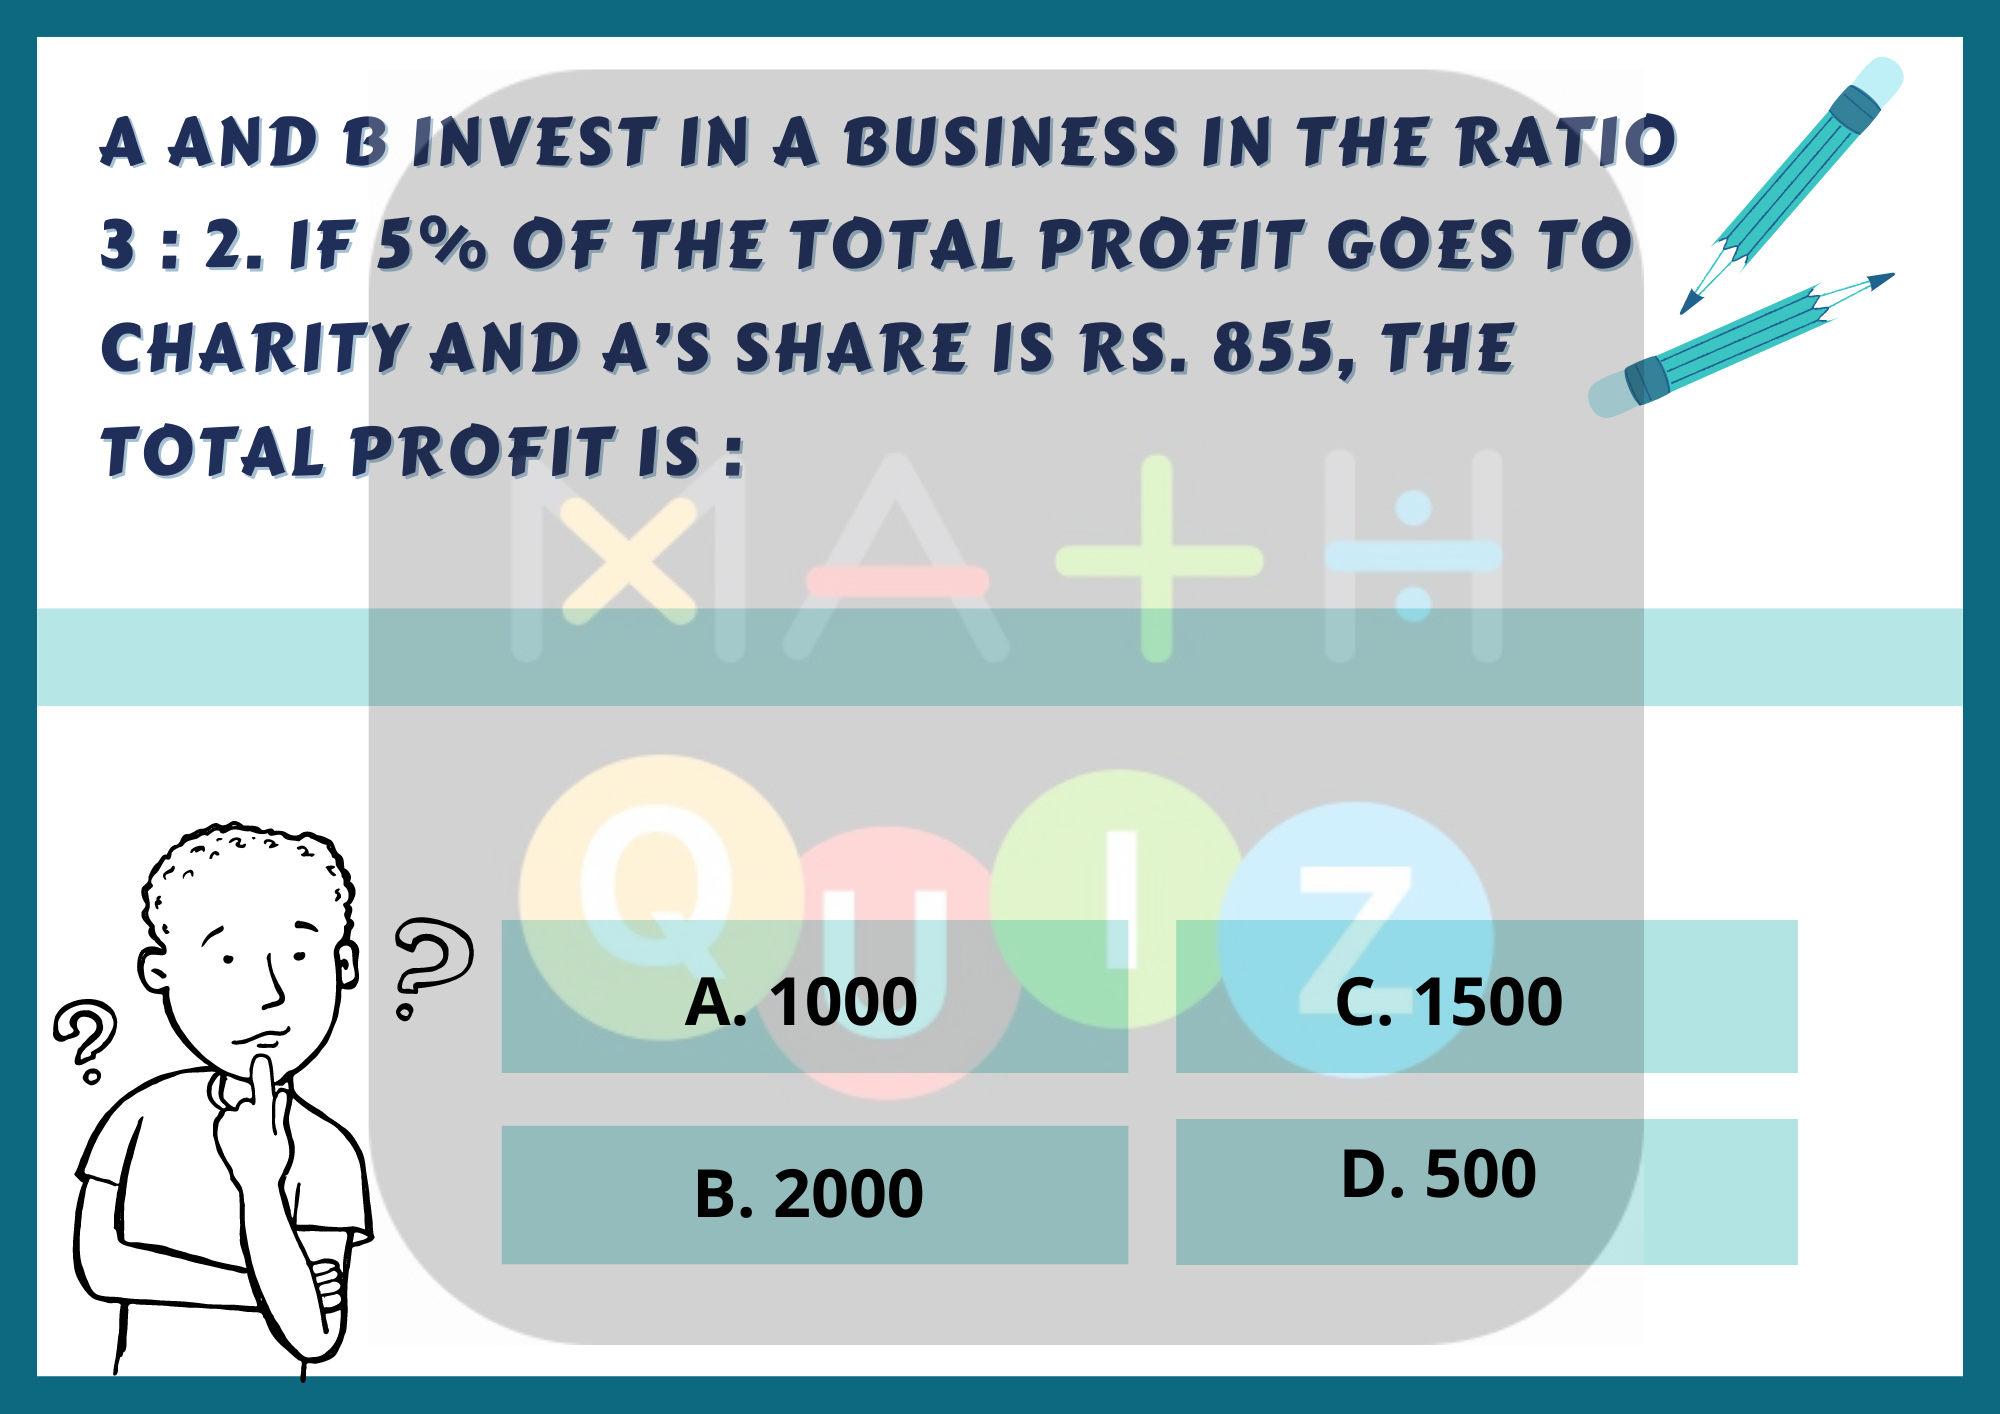 A and B invest in a business in the ratio 3 : 2. If 5% of the total profit goes to charity and A's share is Rs. 855, the total profit is :